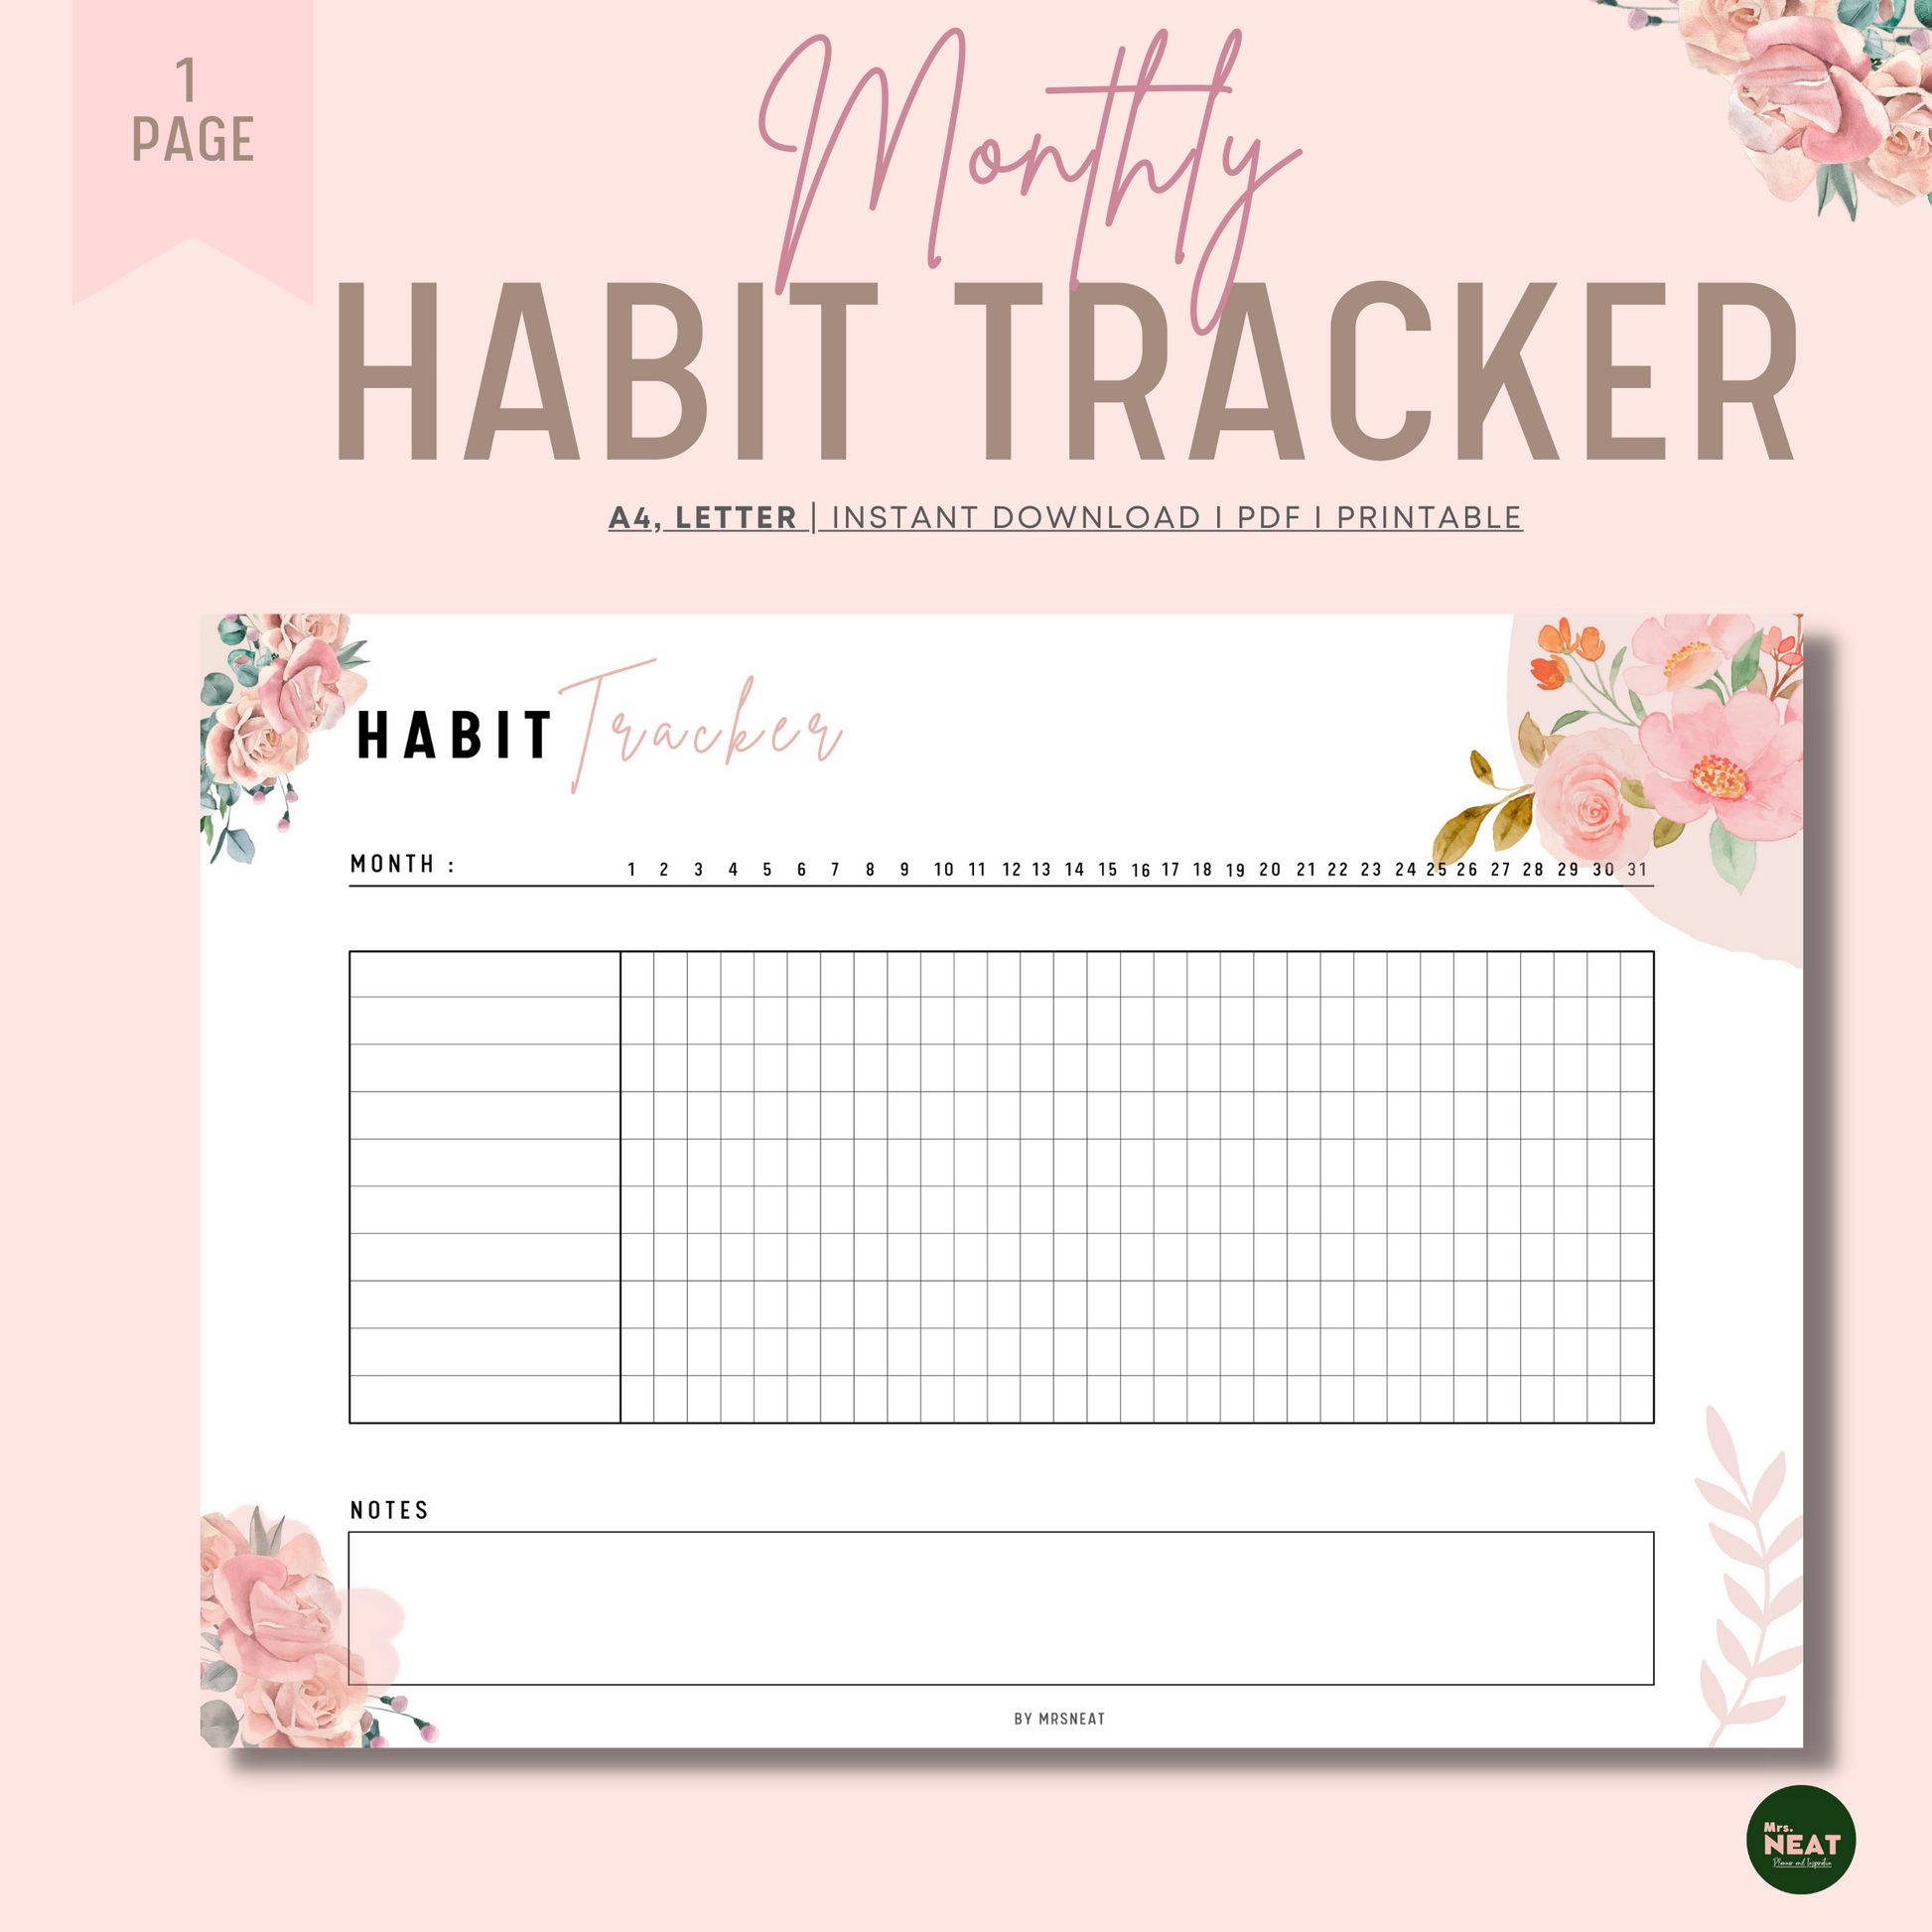 Beautiful Pink Floral Monthly Habit Tracker Planner with undated month, 31 days, room for habits and notes